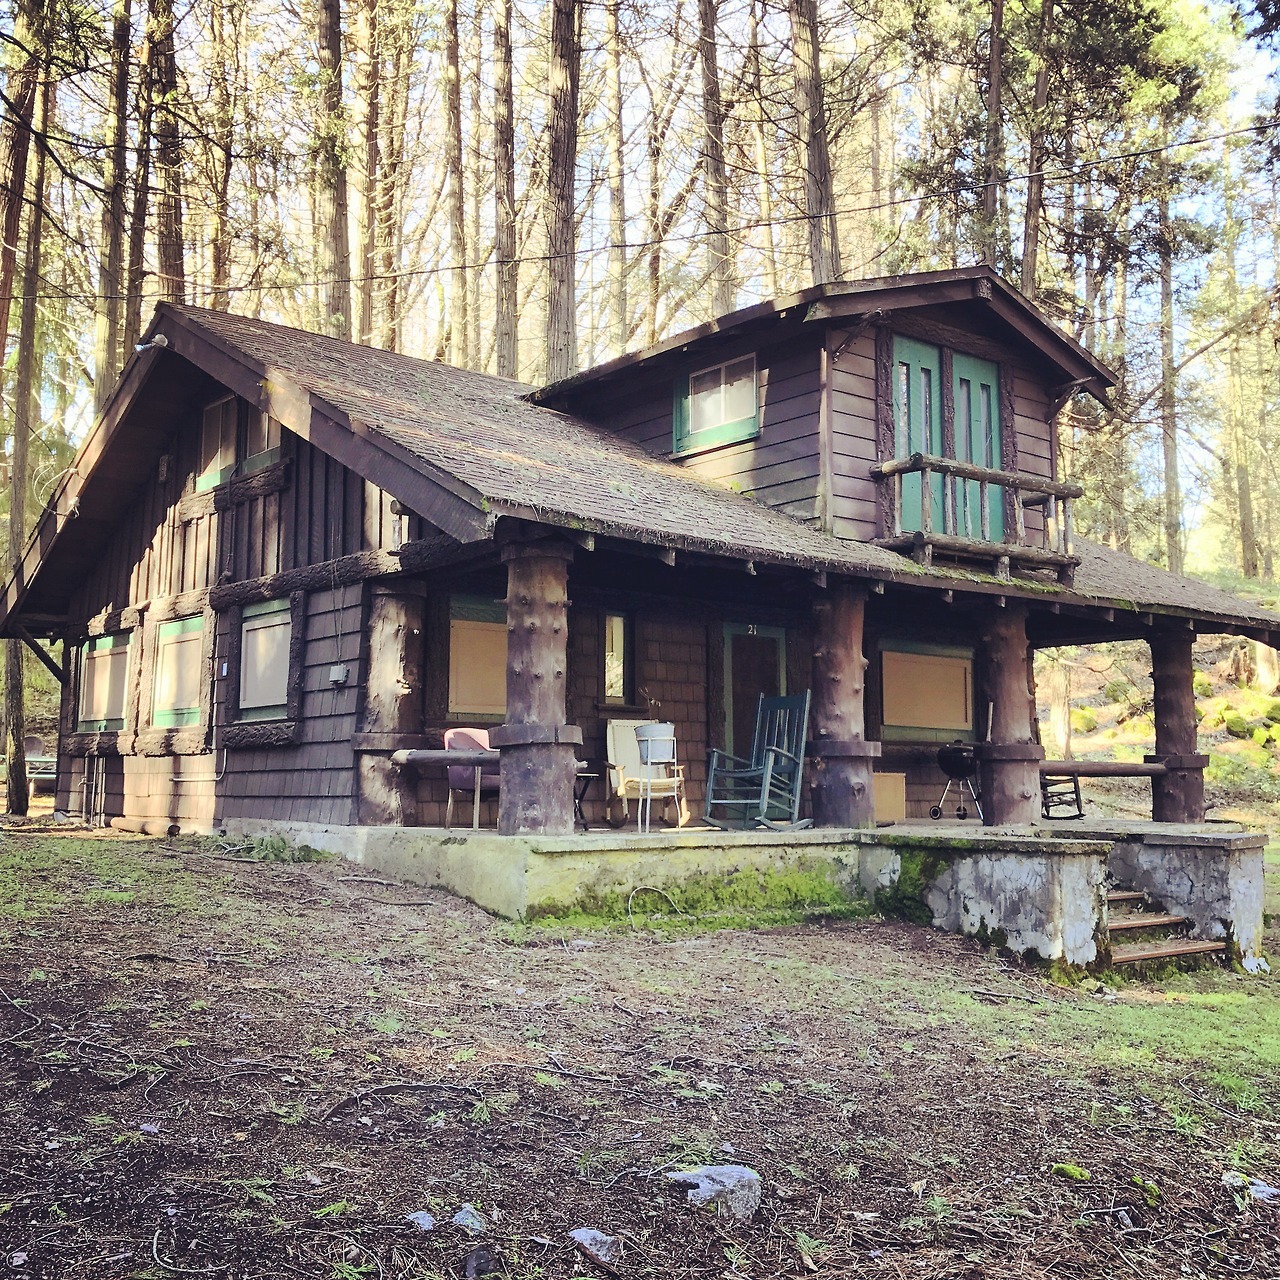 Submitted by Tom Schmidt
“Our 1895 Cabin, recently purchased and in need of repair, we are beginning to restore this California gem back to its original interior, hoping to match the charm of the exterior. This cabin was originally a hunting lodge...